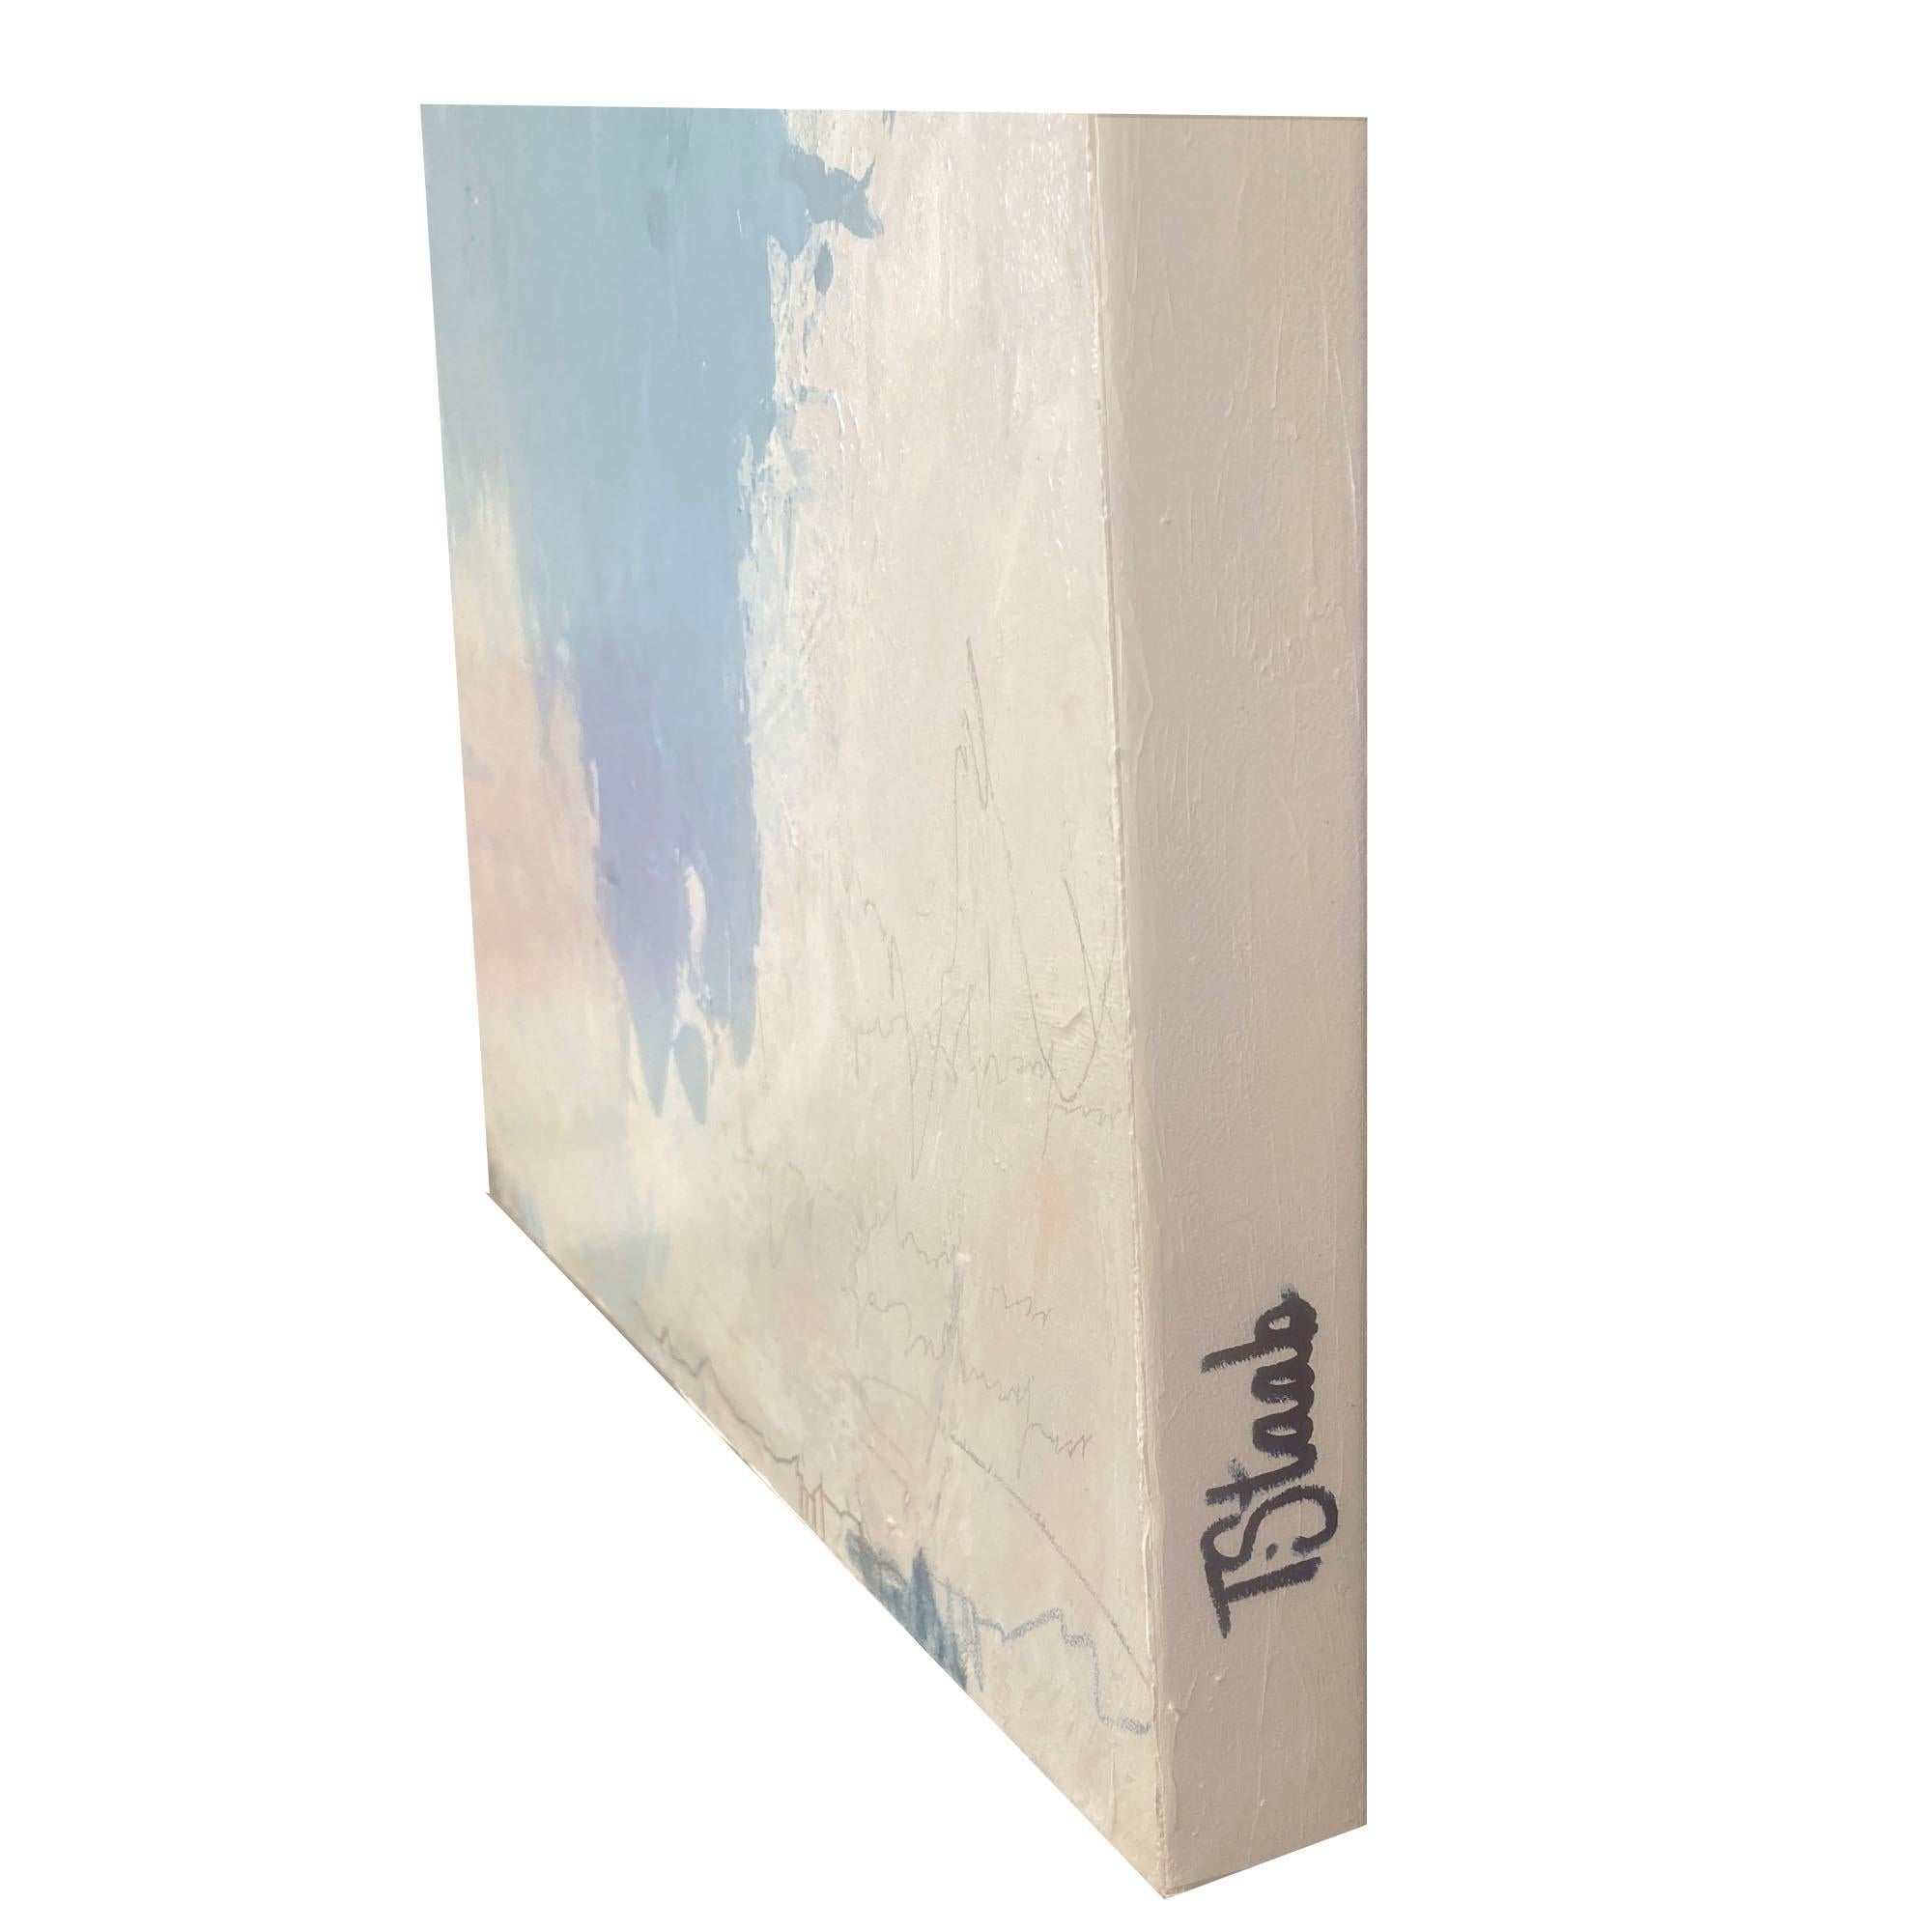 'Rippled Sky' Wrapped Canvas Original Painting features a vibrant abstract aesthetic in tones of blue, white, beige, and green. Inspired by nature and Bible verse Samuel 1:11, Tammy Keller’s positivity and light radiates through her artwork.